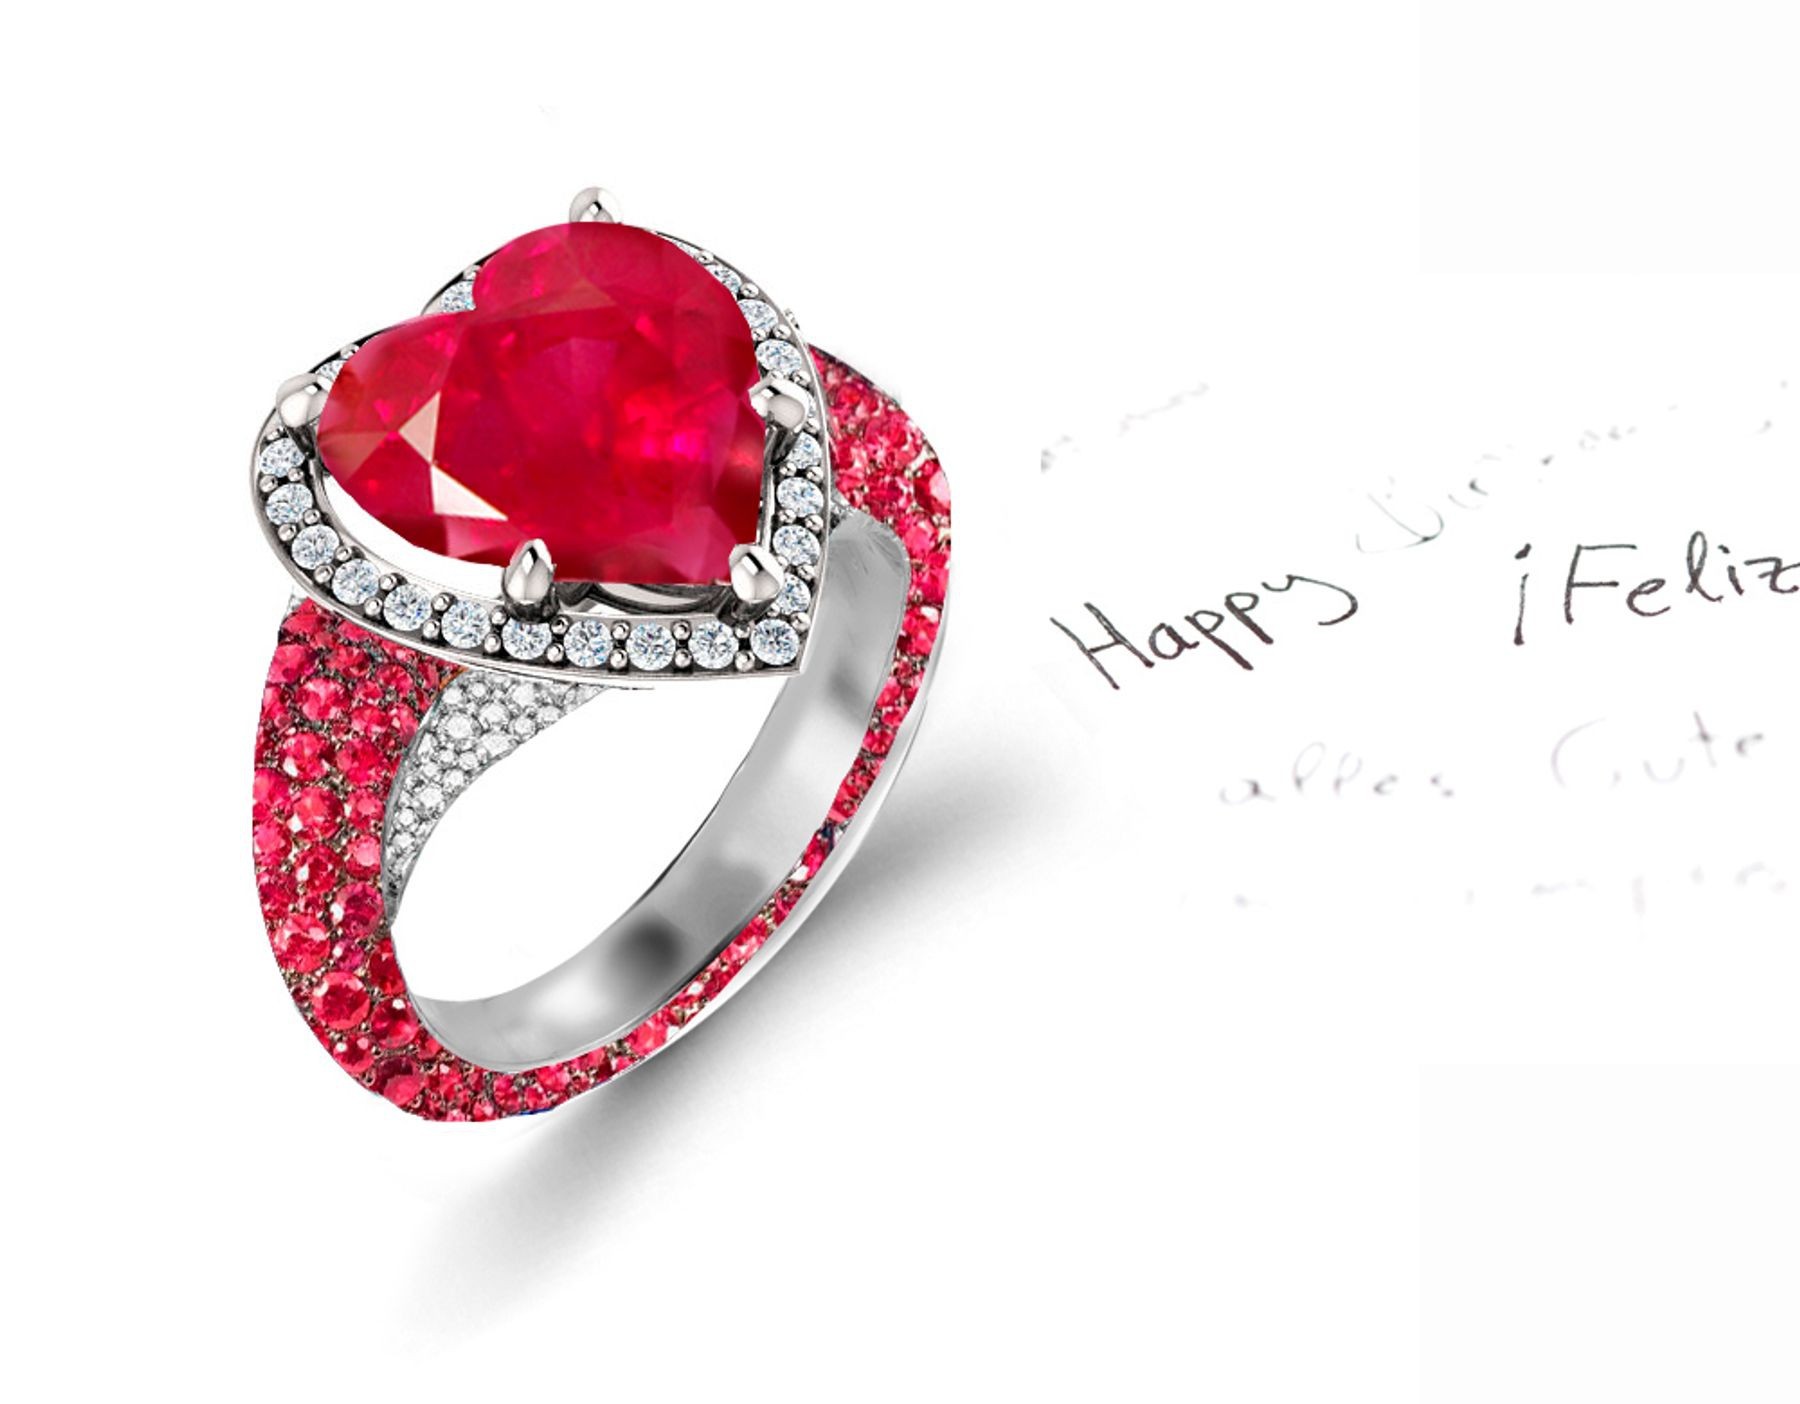 Shop Fine Quality Made To Order Halo pave Diamond & Ruby Eternity Style Engagement Rings